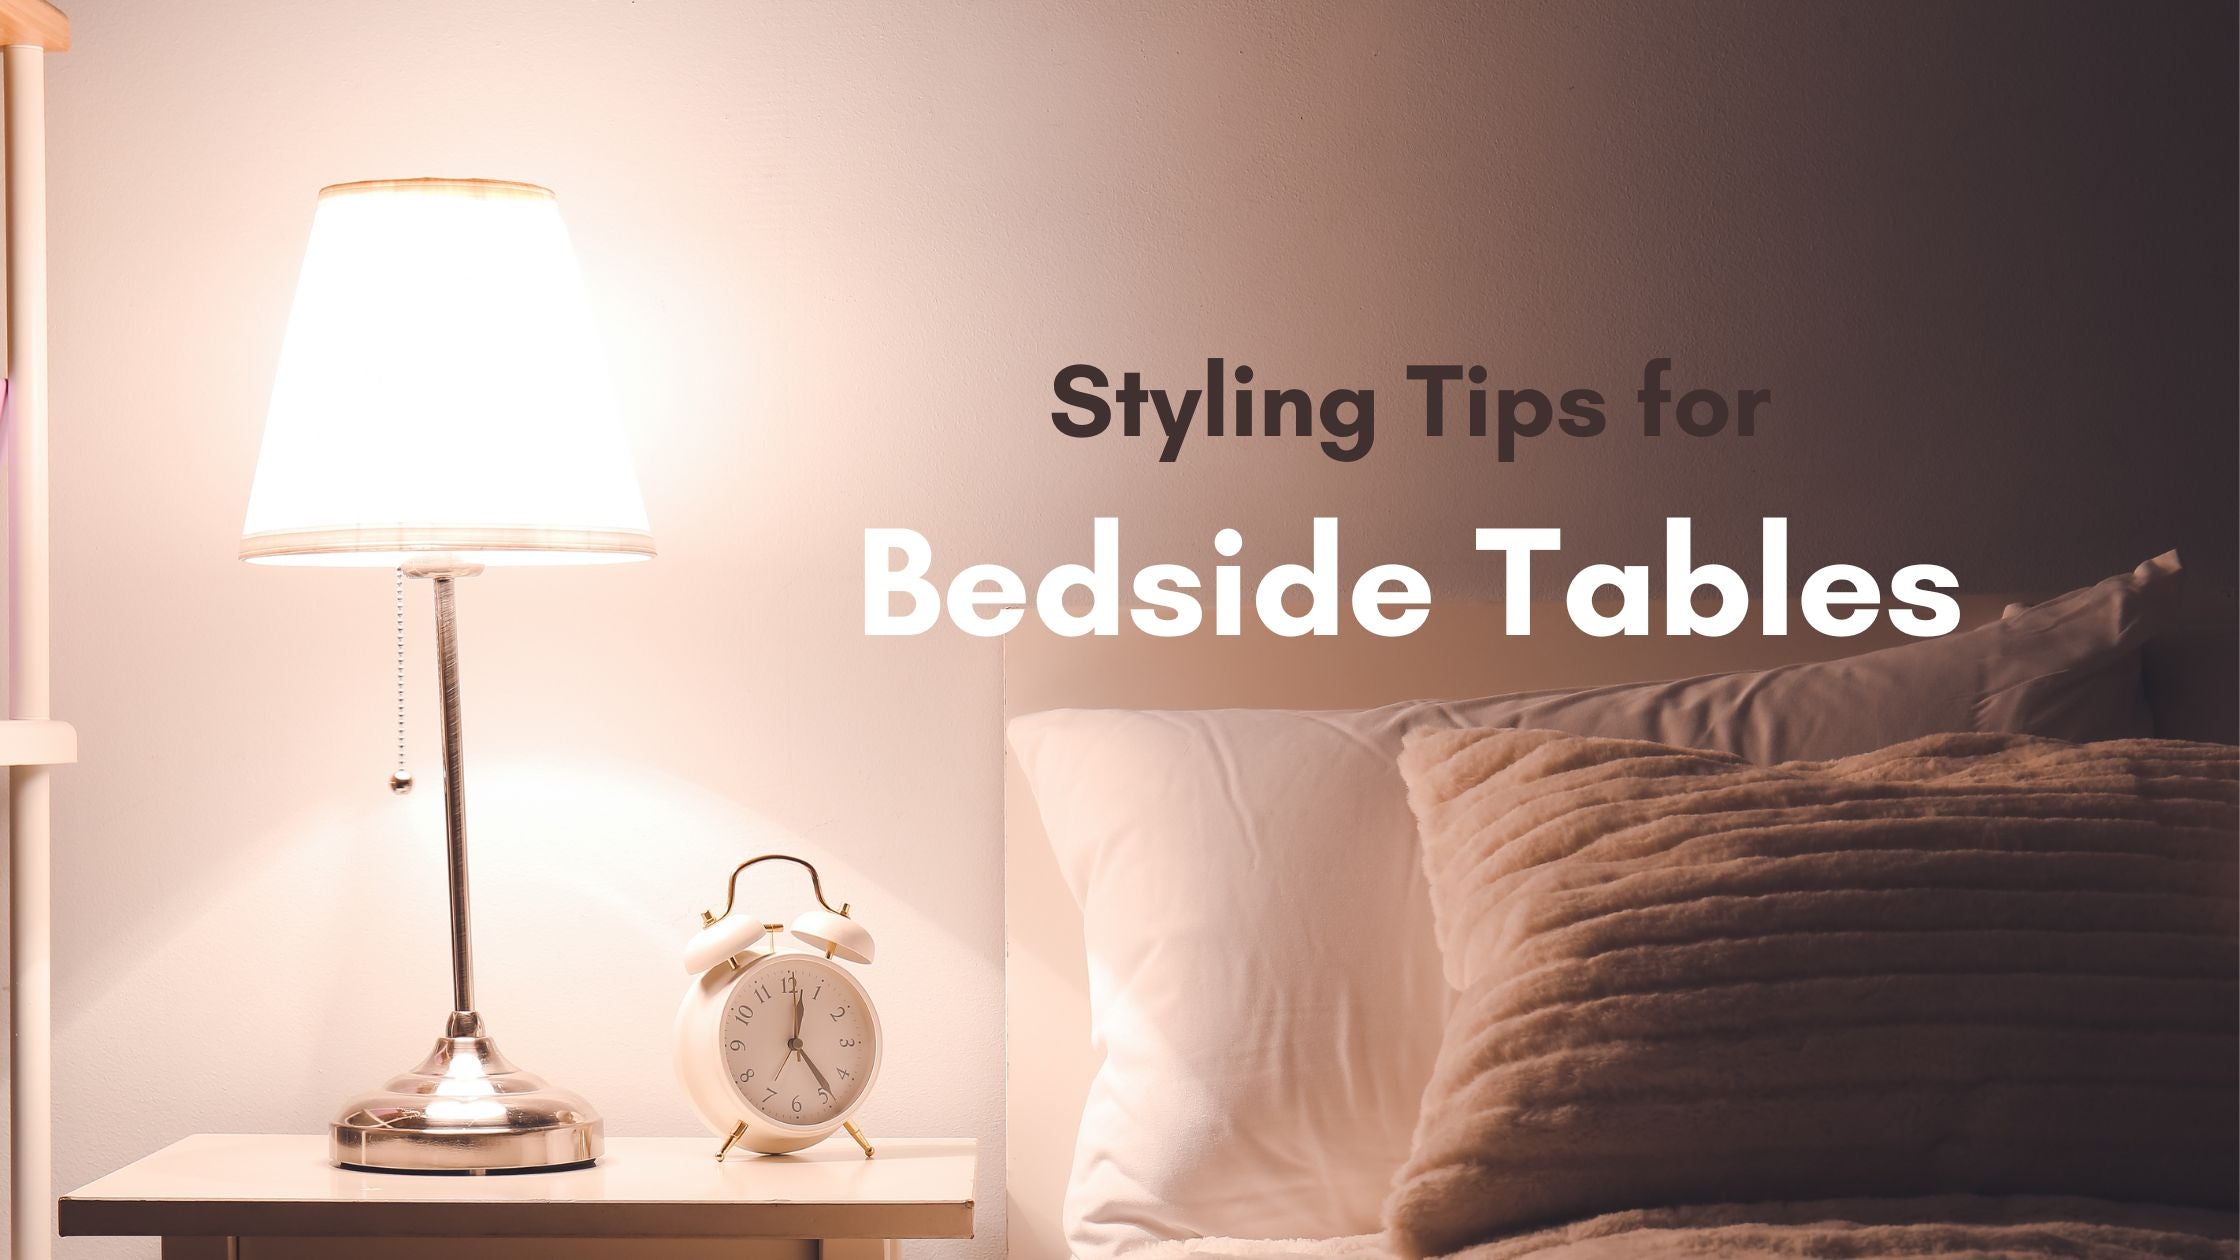 Expert Tips for Styling Bedside Tables